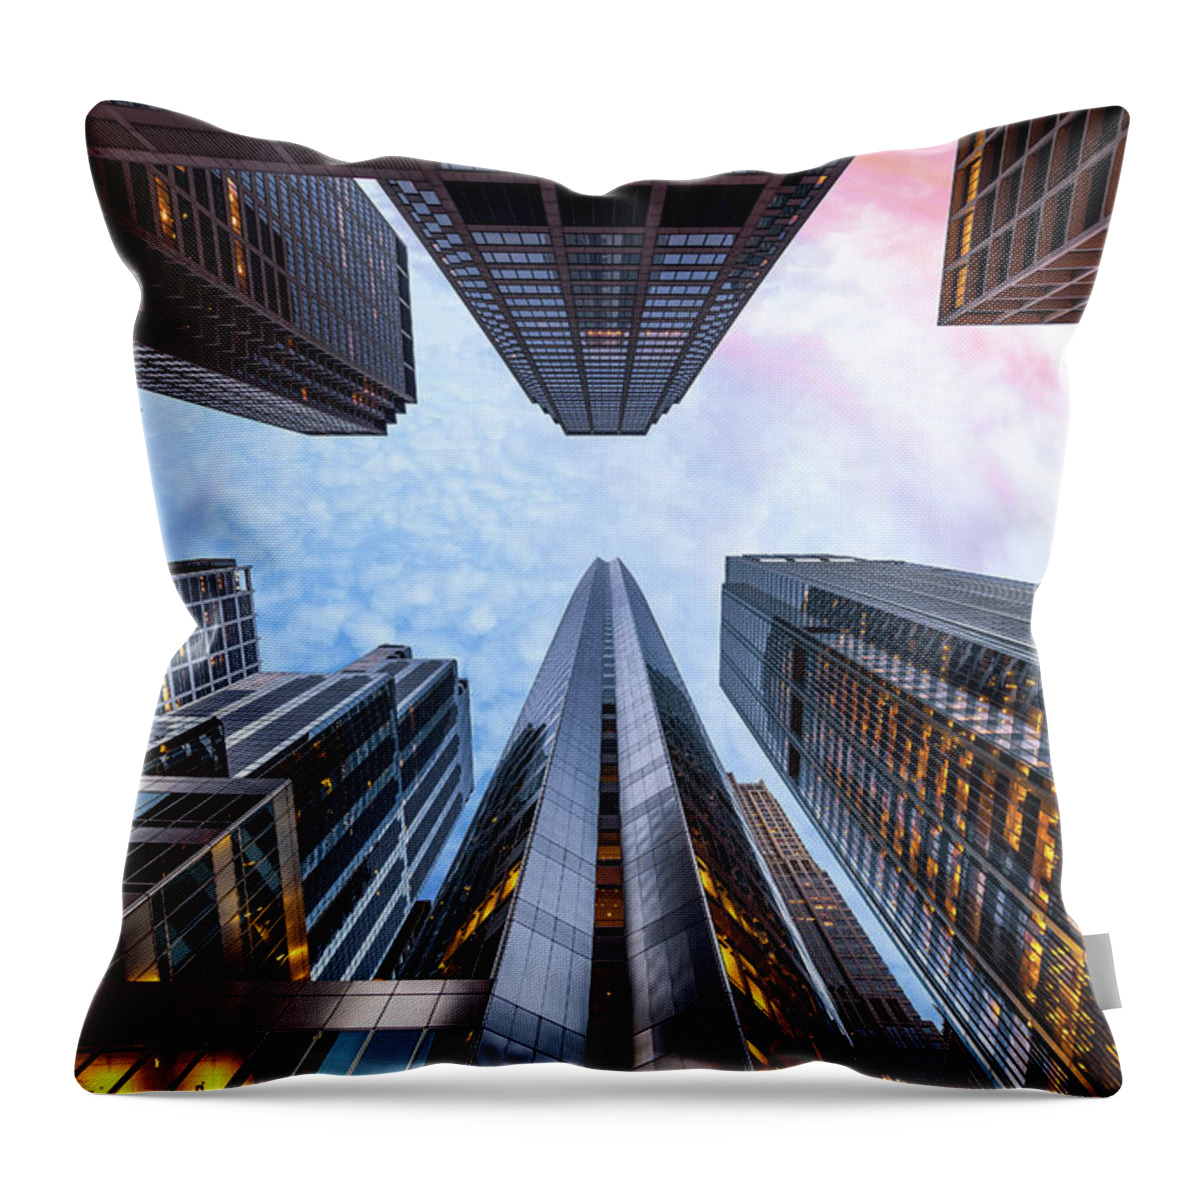 Directly Below Throw Pillow featuring the photograph Sunrise, Looking Up, Chicago, Illinois by Joe Daniel Price